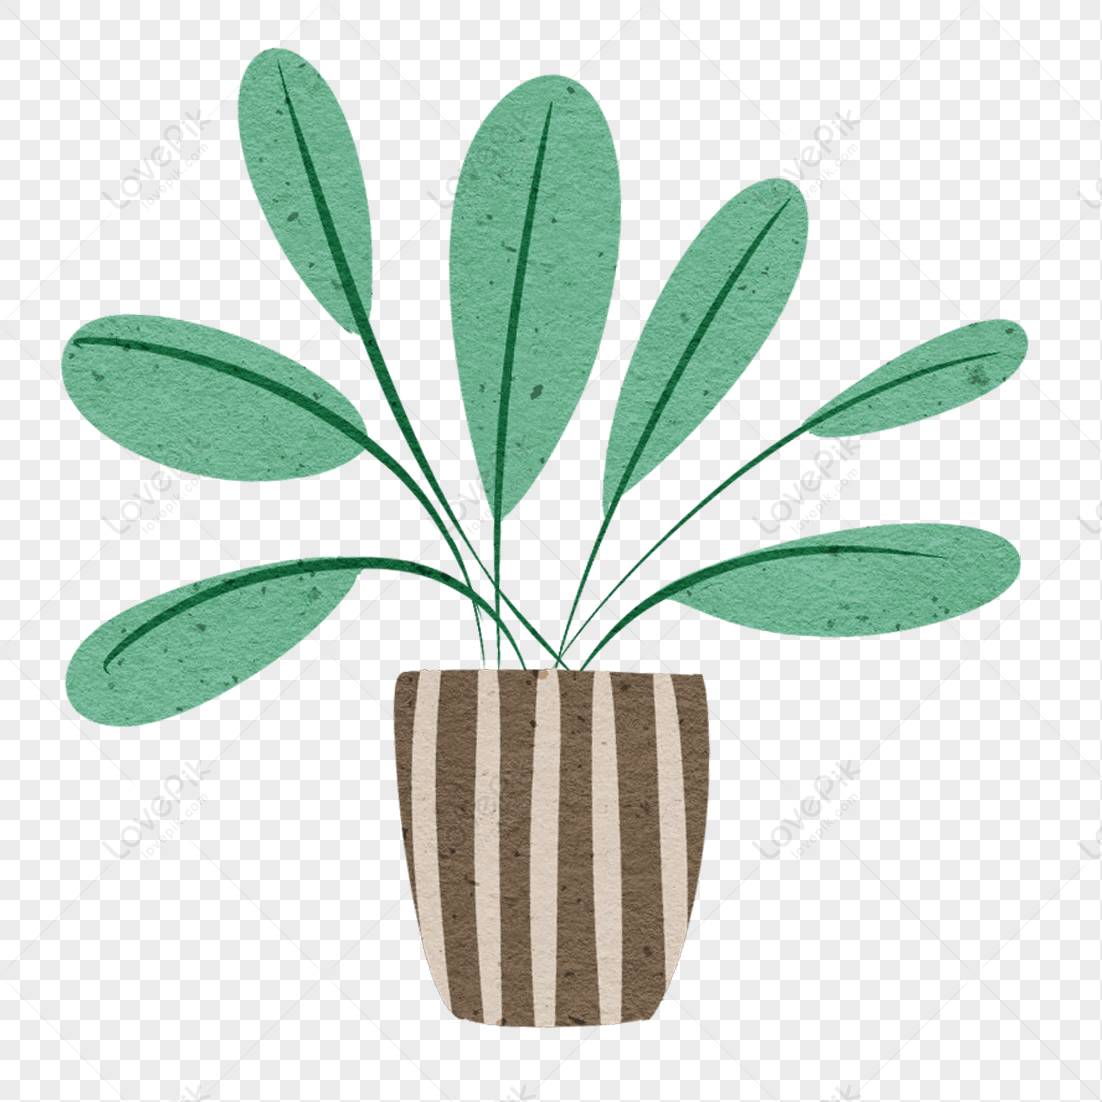 Plant Potted Plant PNG Image Free Download And Clipart Image For Free ...